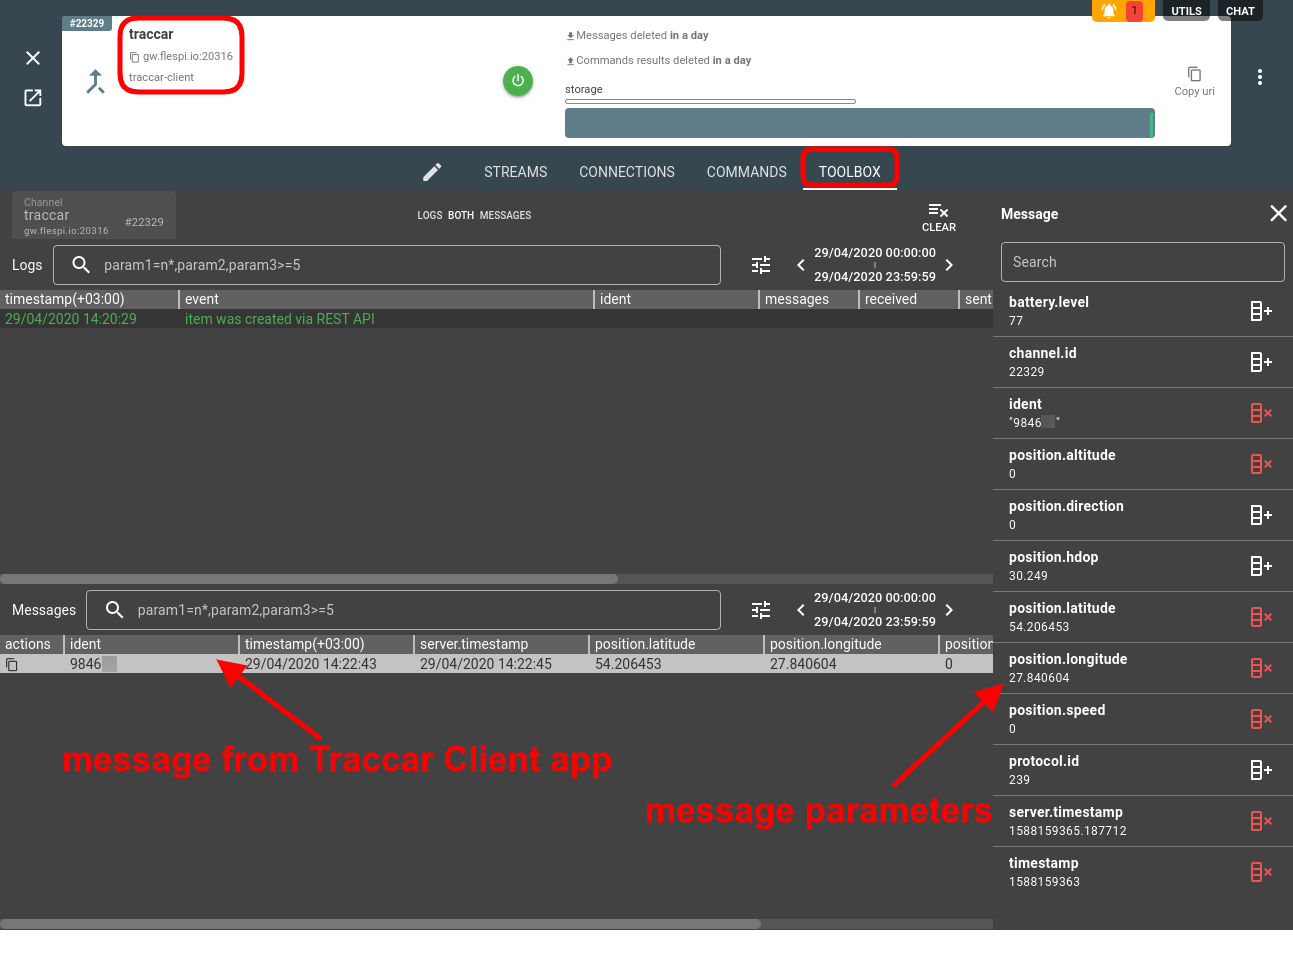 traccar client channel toolbox